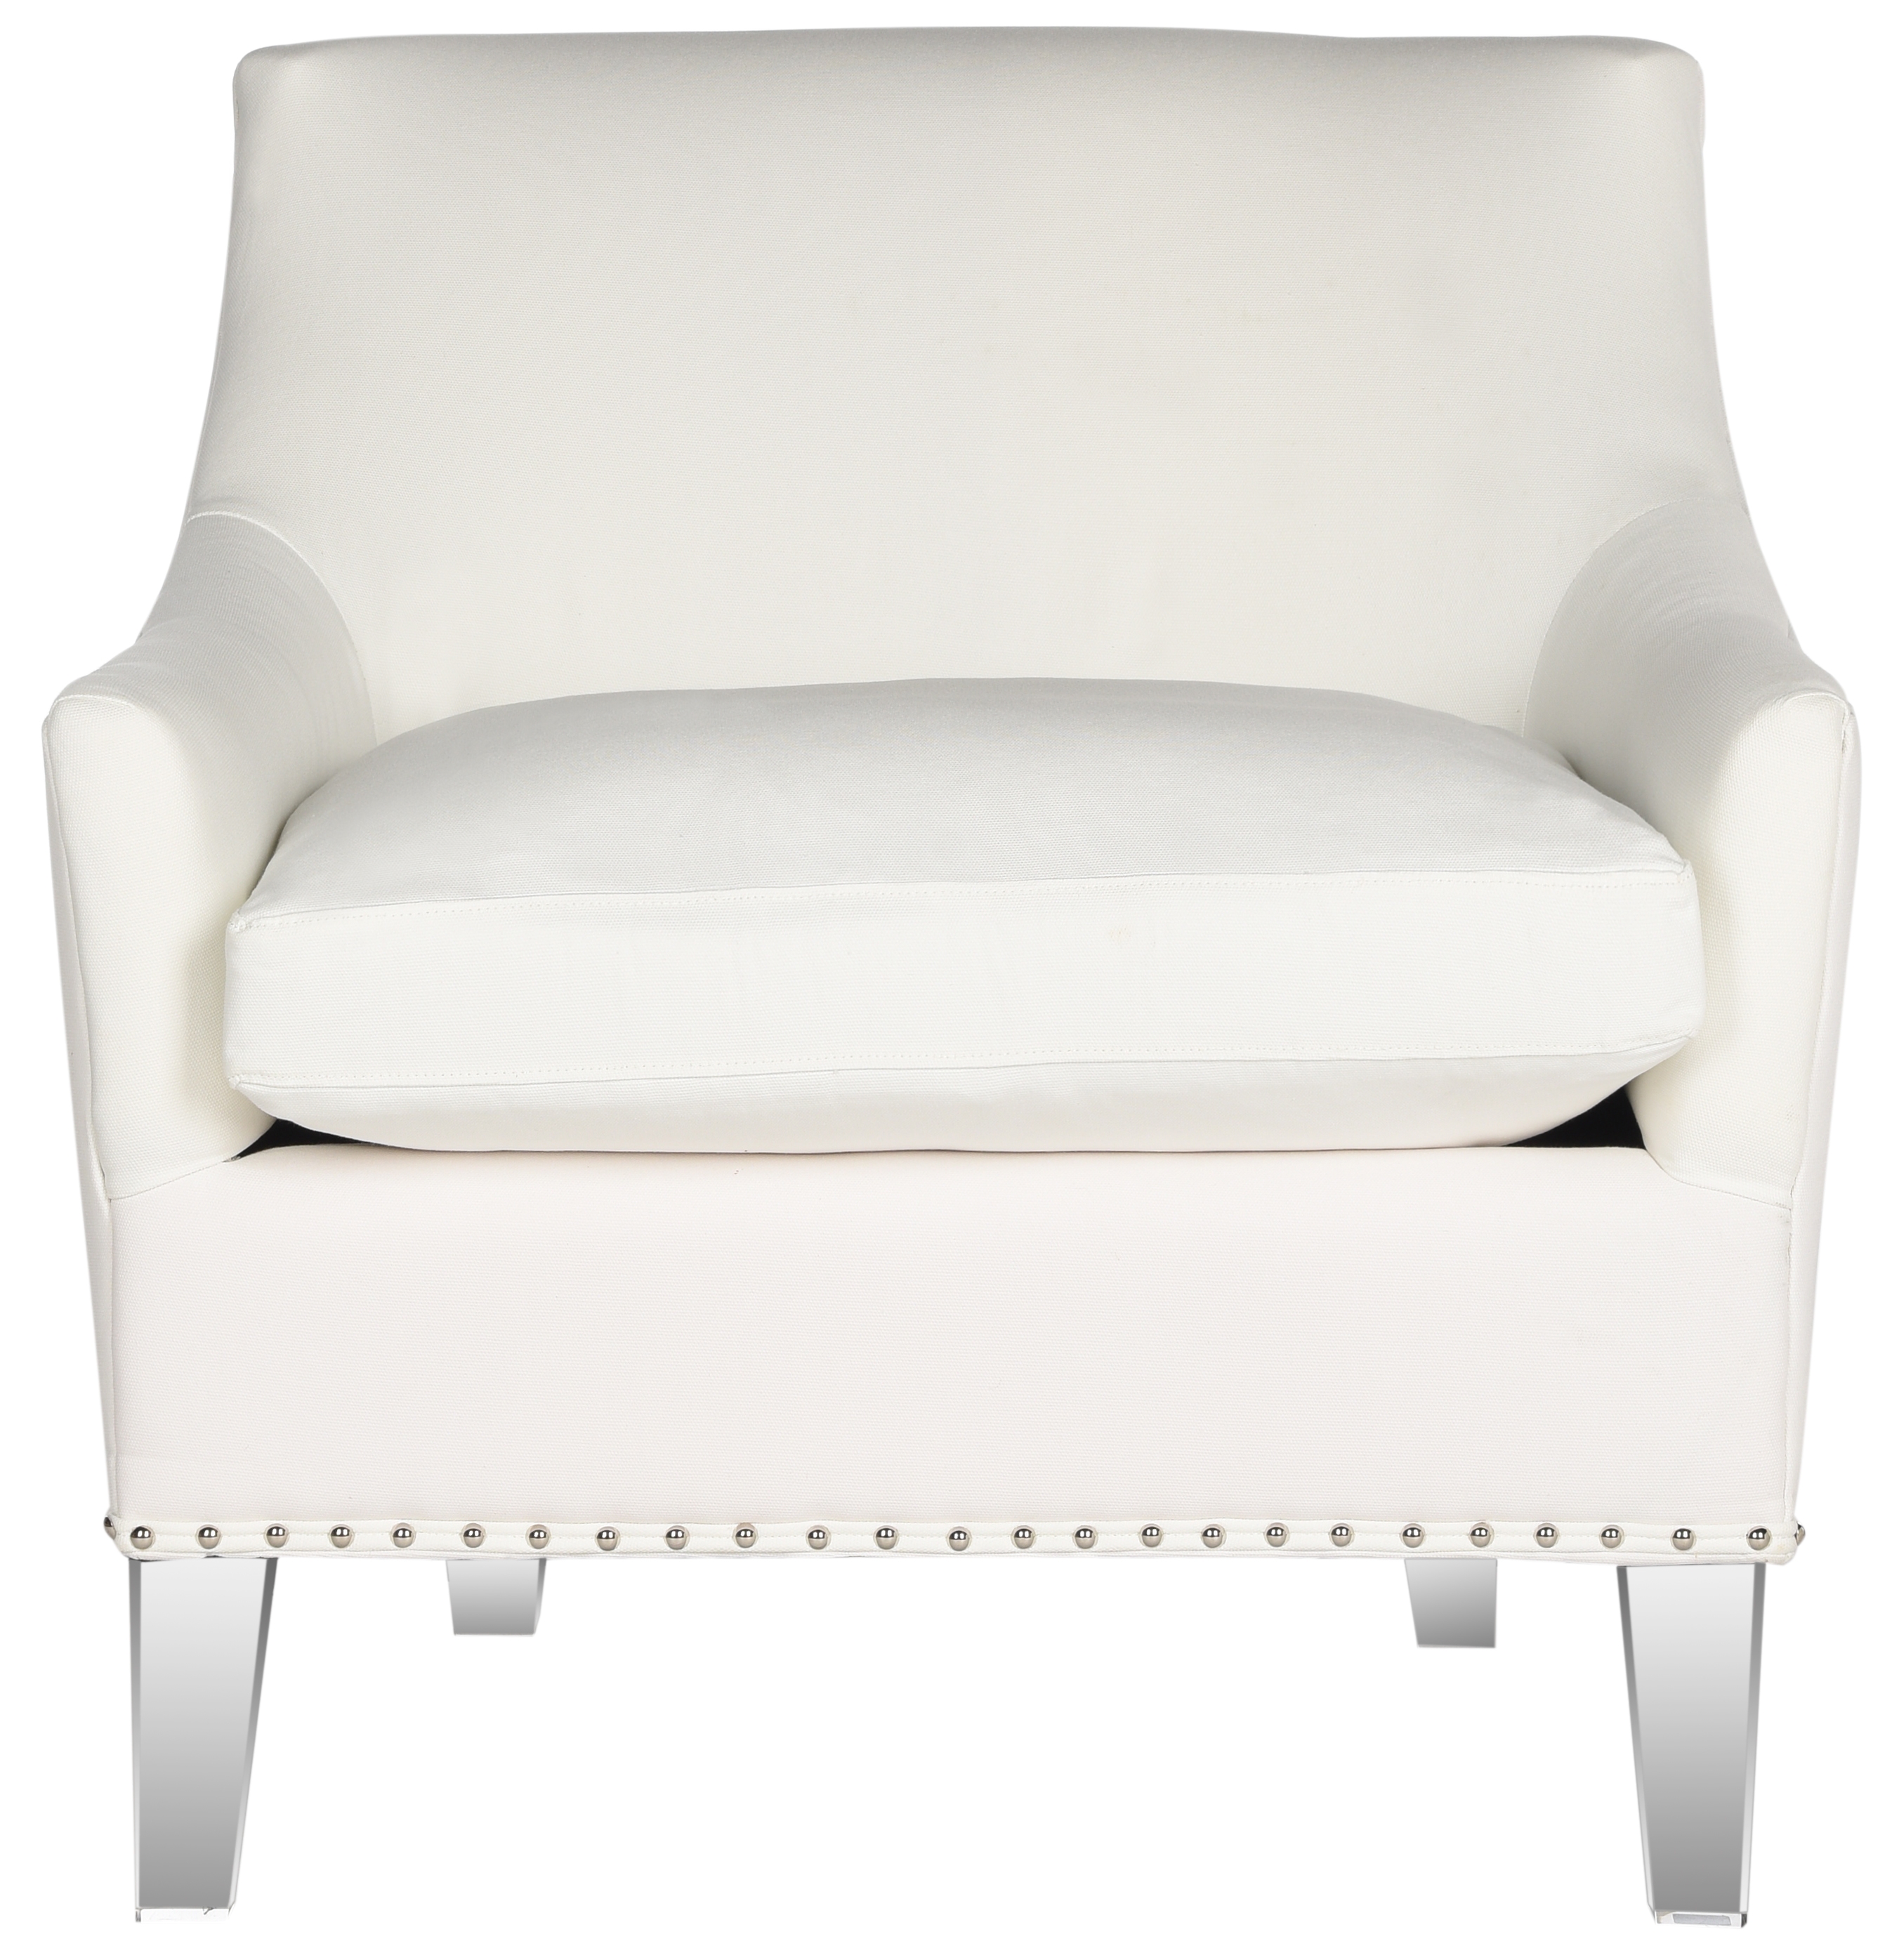 Hollywood Glam Tufted Acrylic White Club Chair W/ Silver Nail Heads - White/Clear - Arlo Home - Image 0